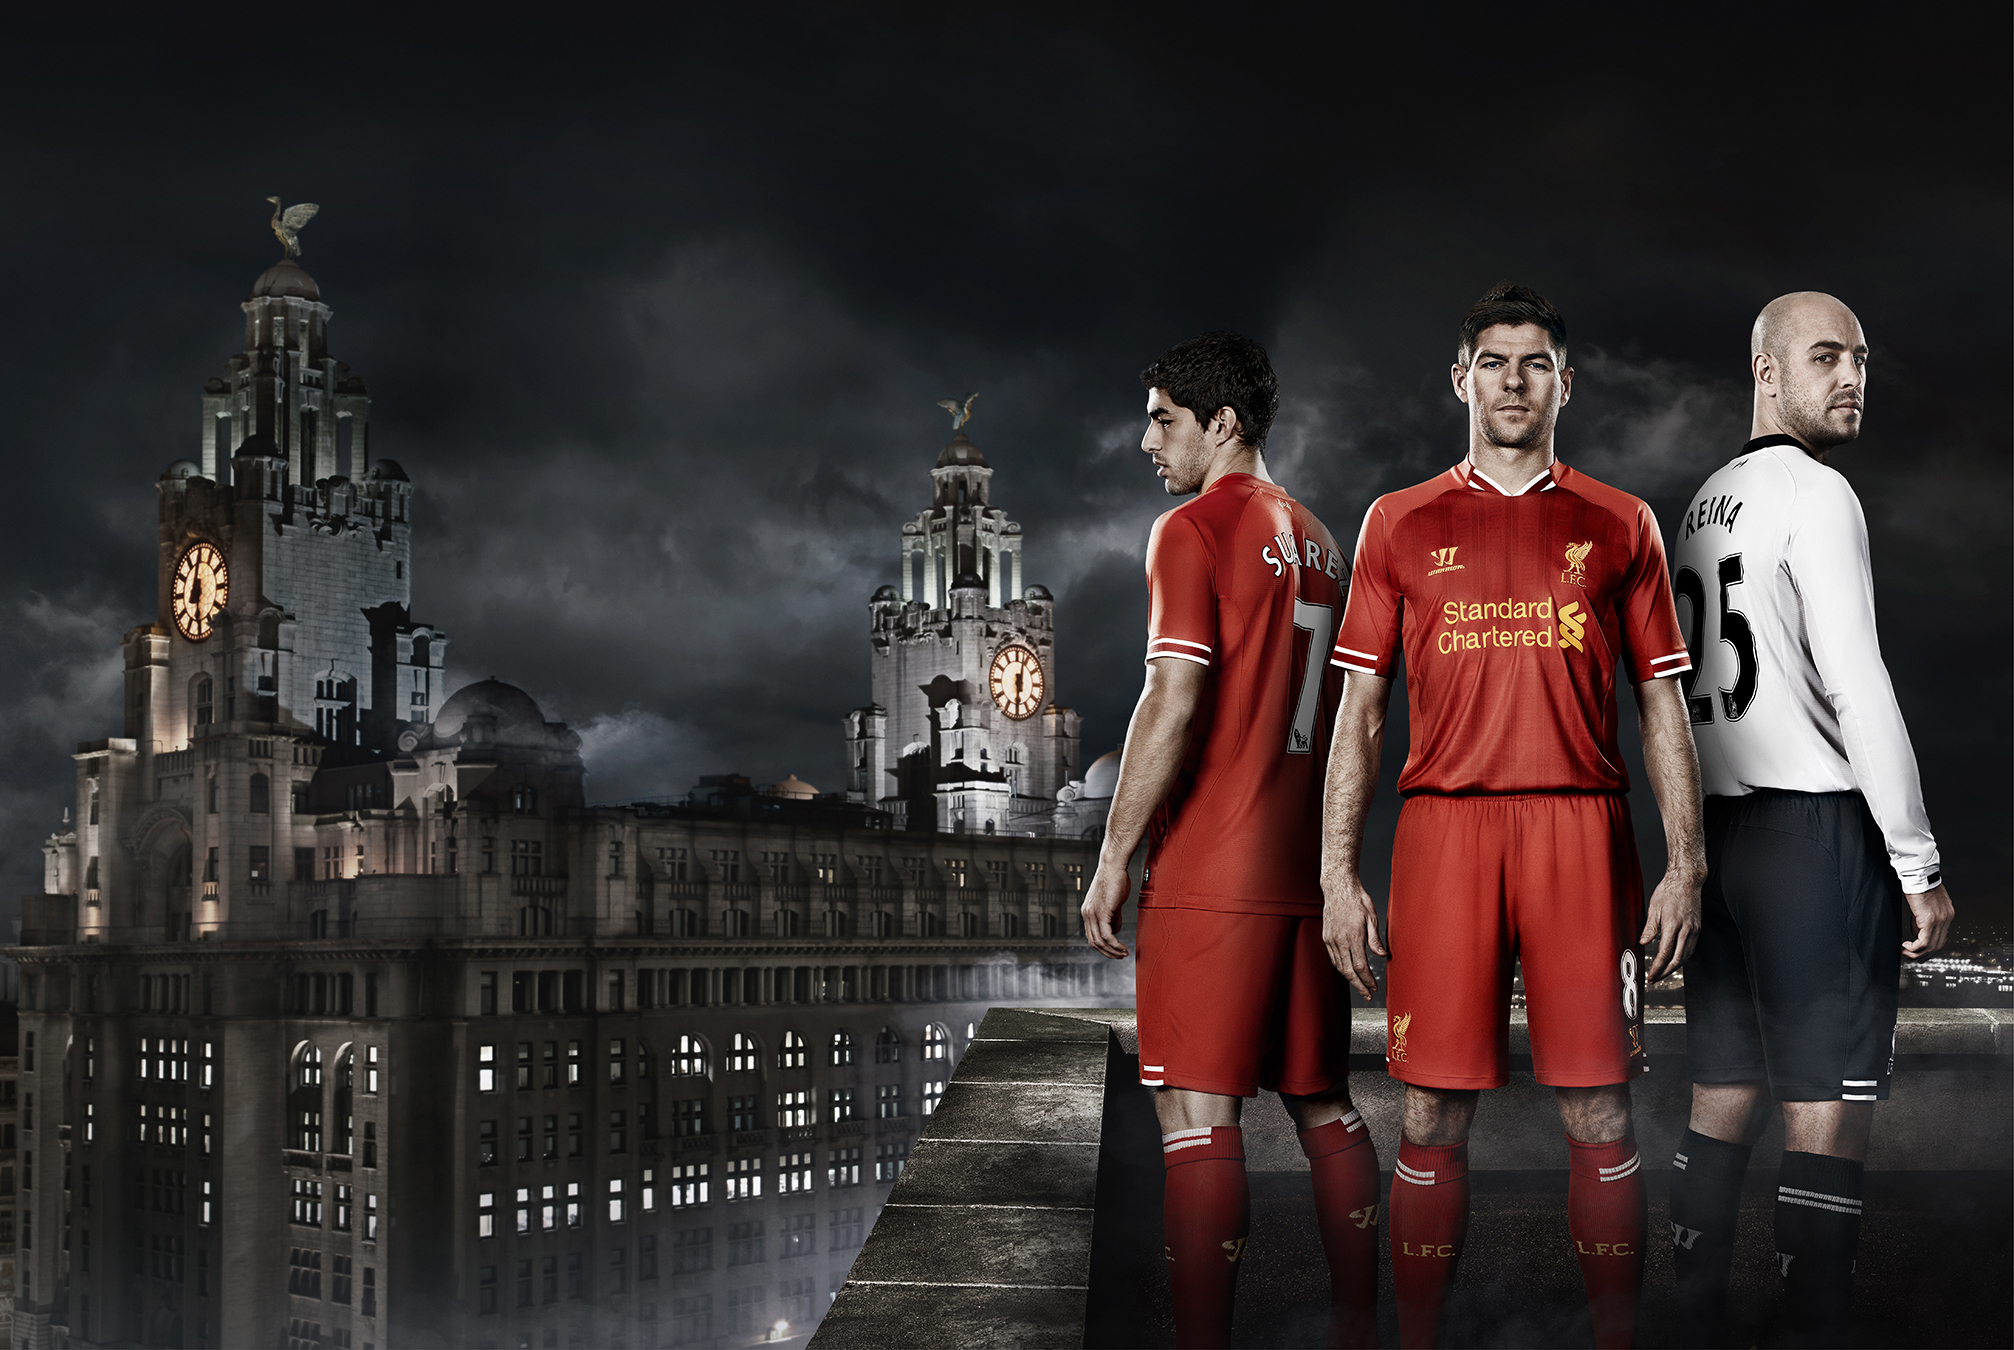 2012-13: The press view - Liverpool FC